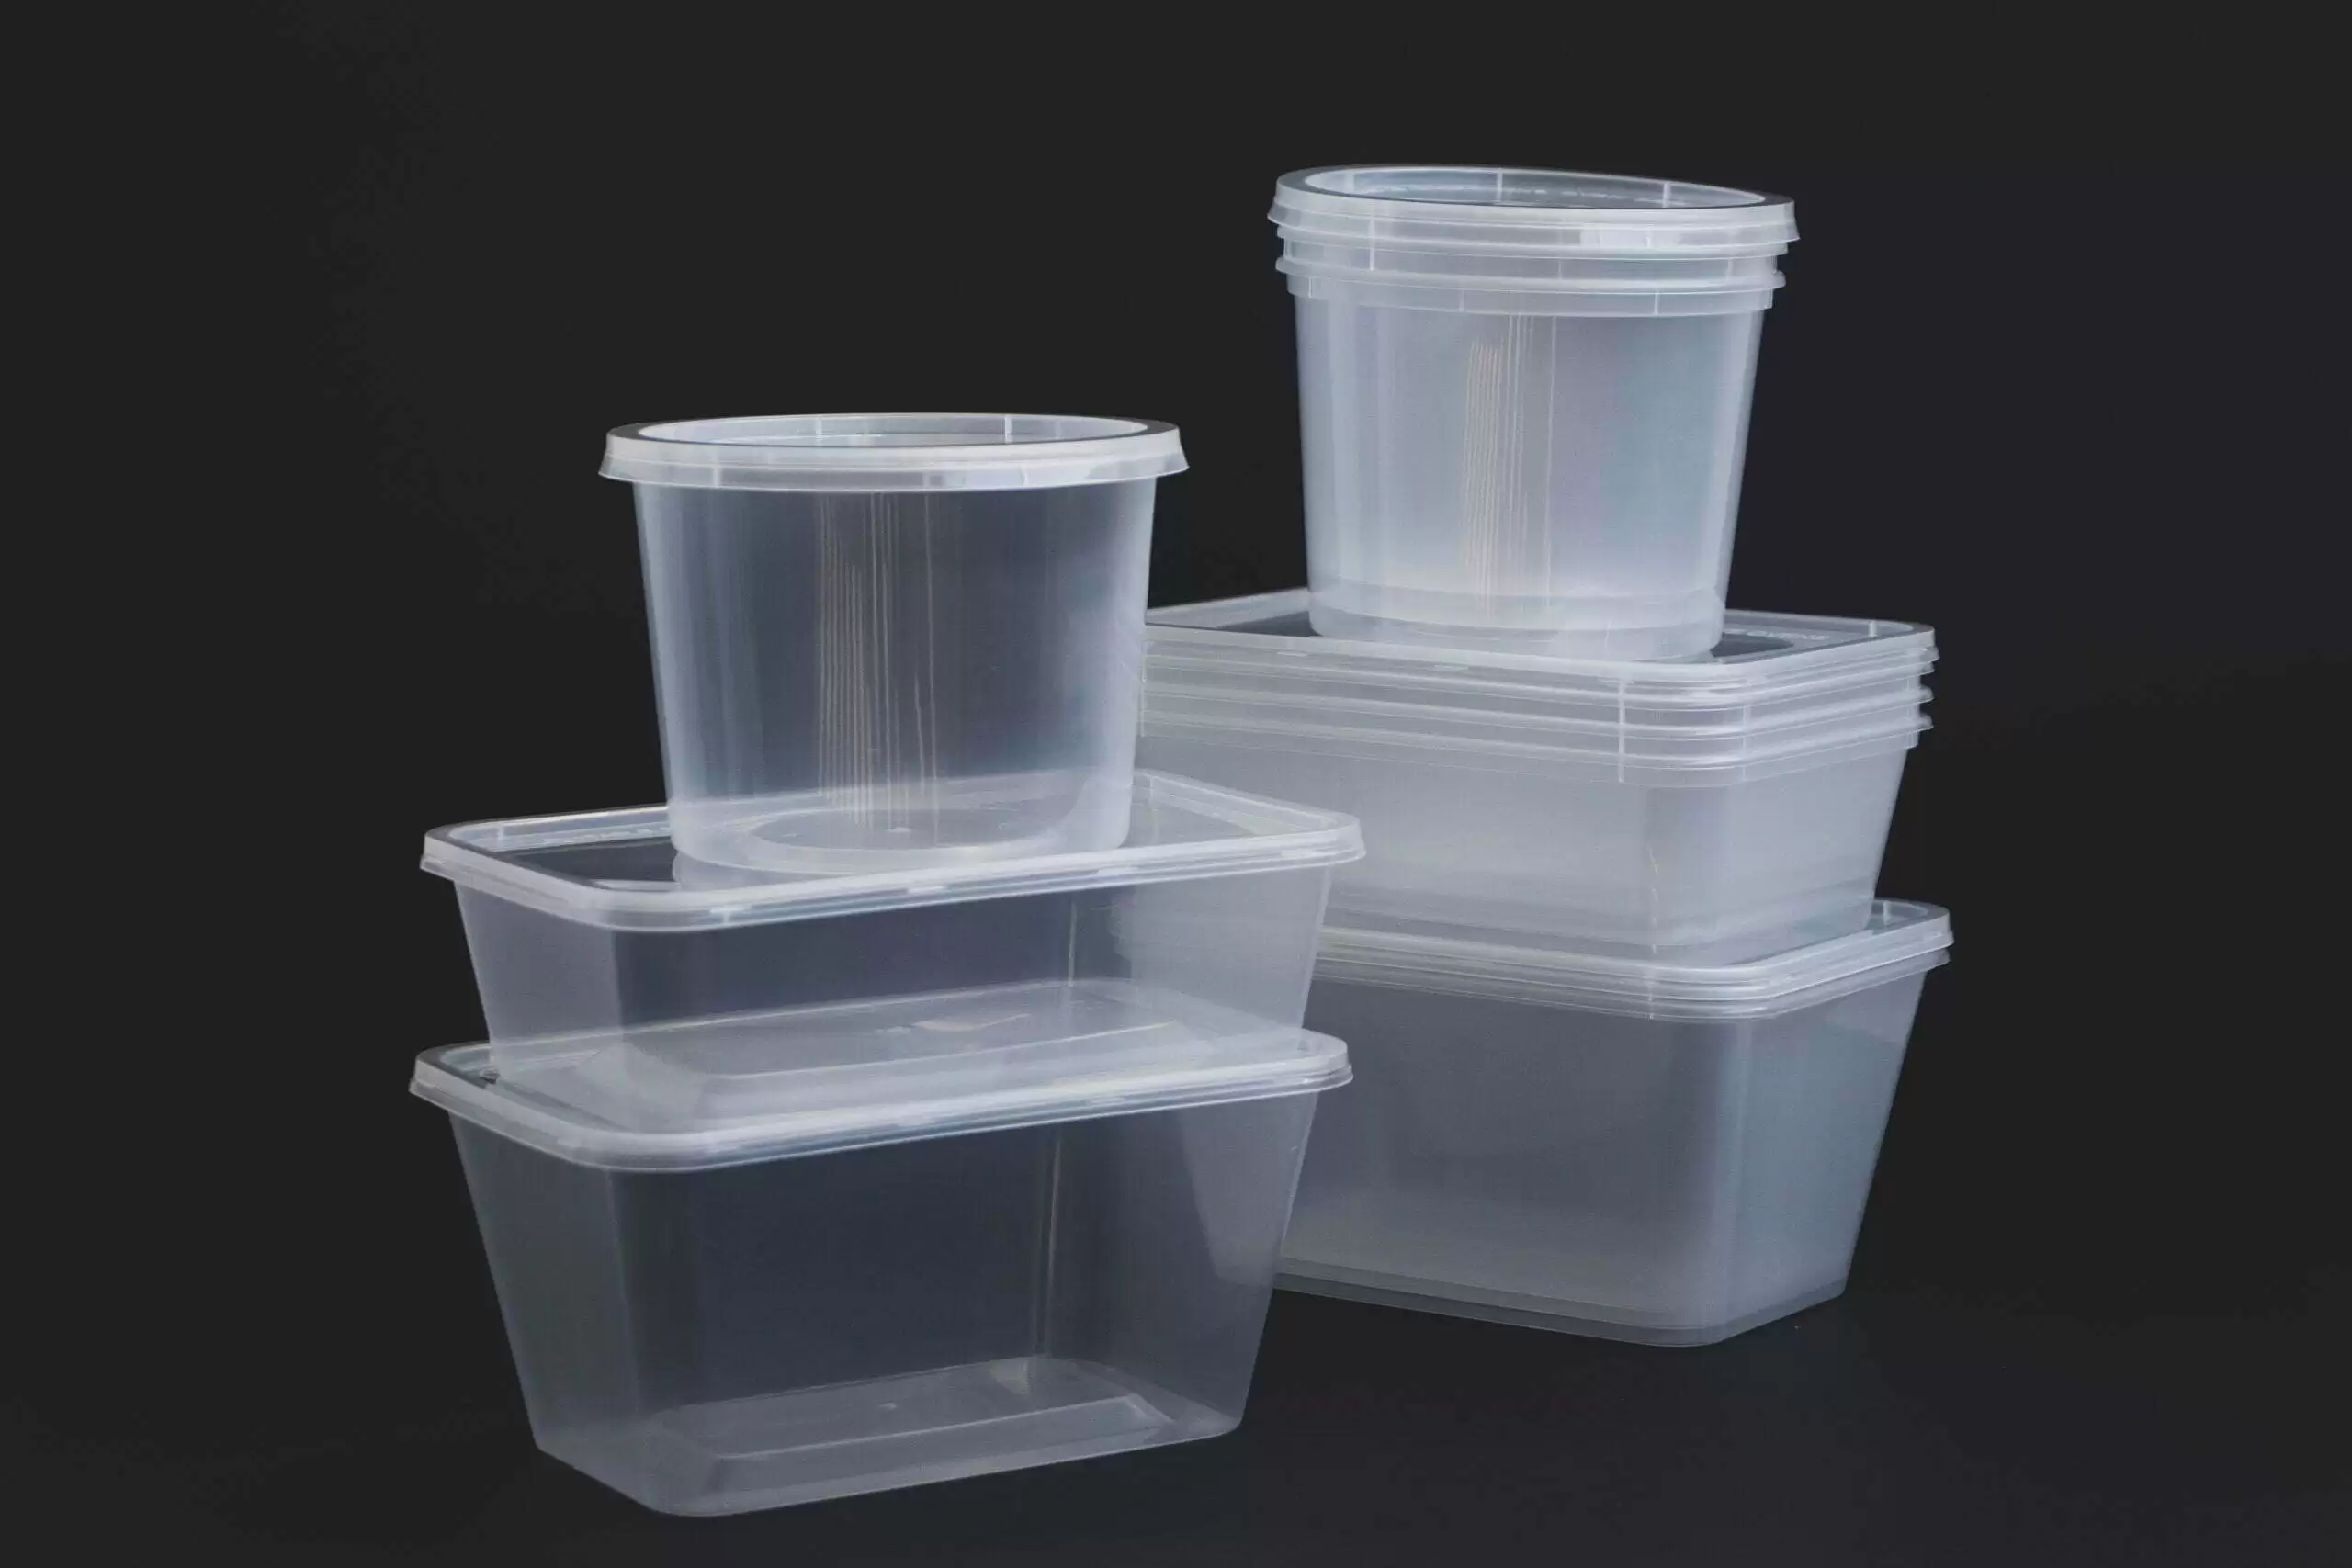 Thin walled containers